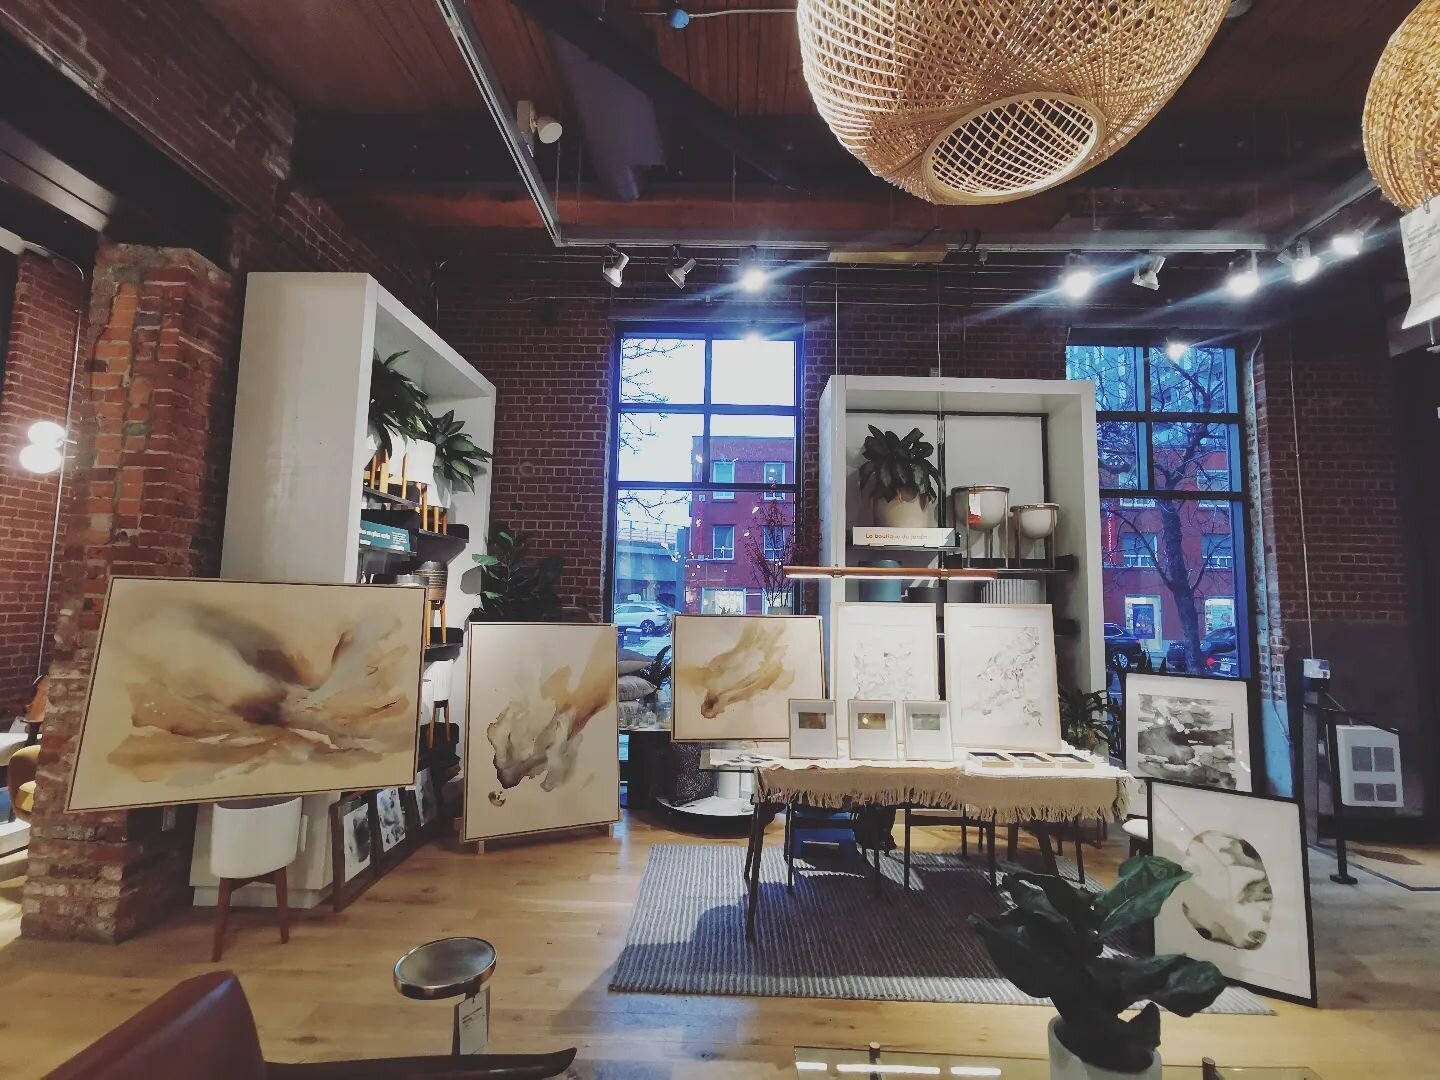 So happy to be here and show my work at West Elm @westelmmtl 🤍

Si heureuse d'&ecirc;tre &agrave; West Elm @westelmmtl et exposer mes &oelig;uvres 🤍

.
.
.
interiordesignersmontreal #acrylicpaint #canadianartist #montrealartist #abstractexpressioni